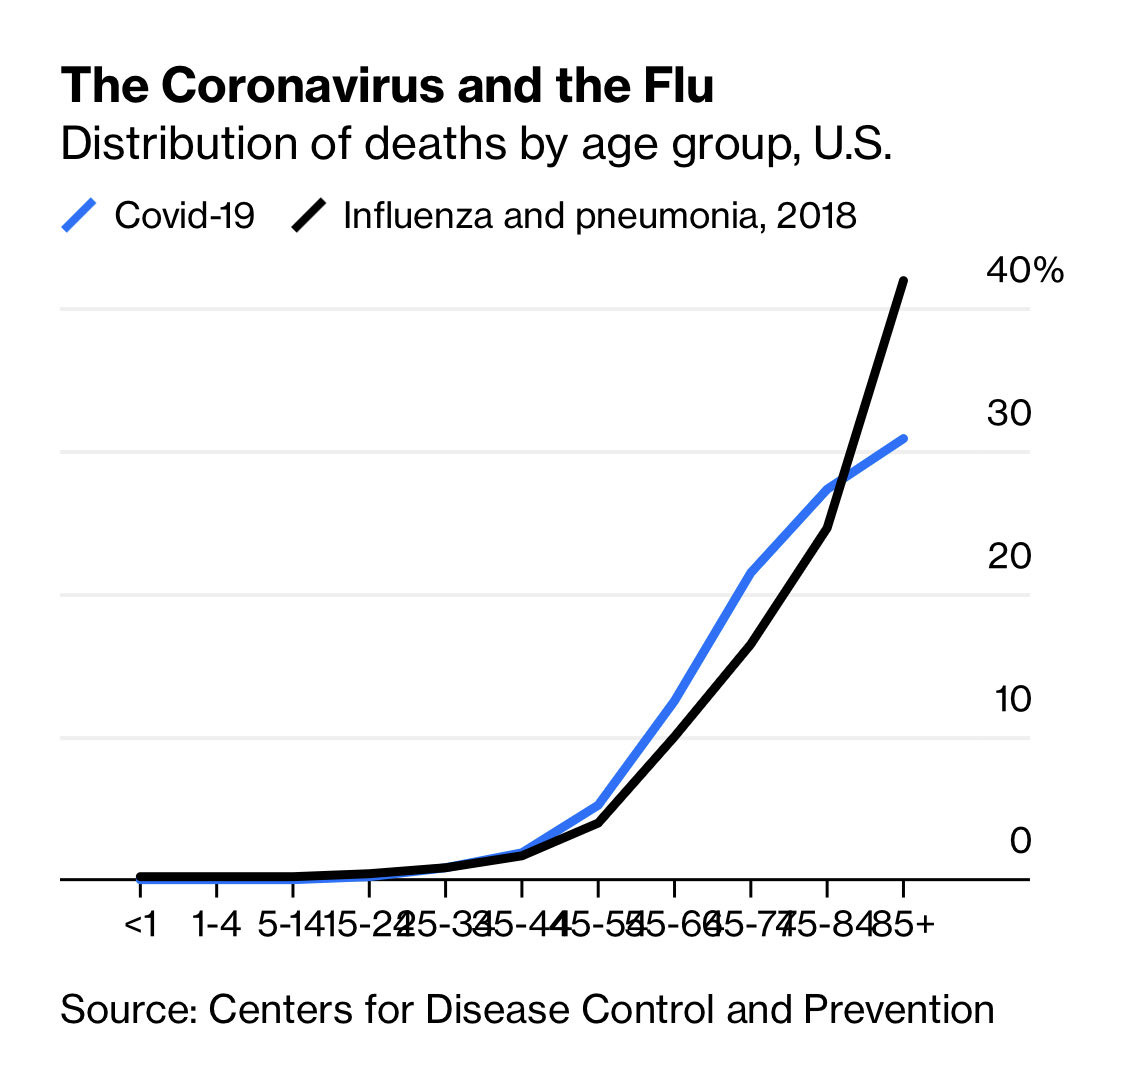 It is primarily in these middle years that you are far more likely to die from CV than the flu.Whereas flu effects the old and the young immune systems, people in the middle fend it off better. CV hits those beginning to age much harder. 5/